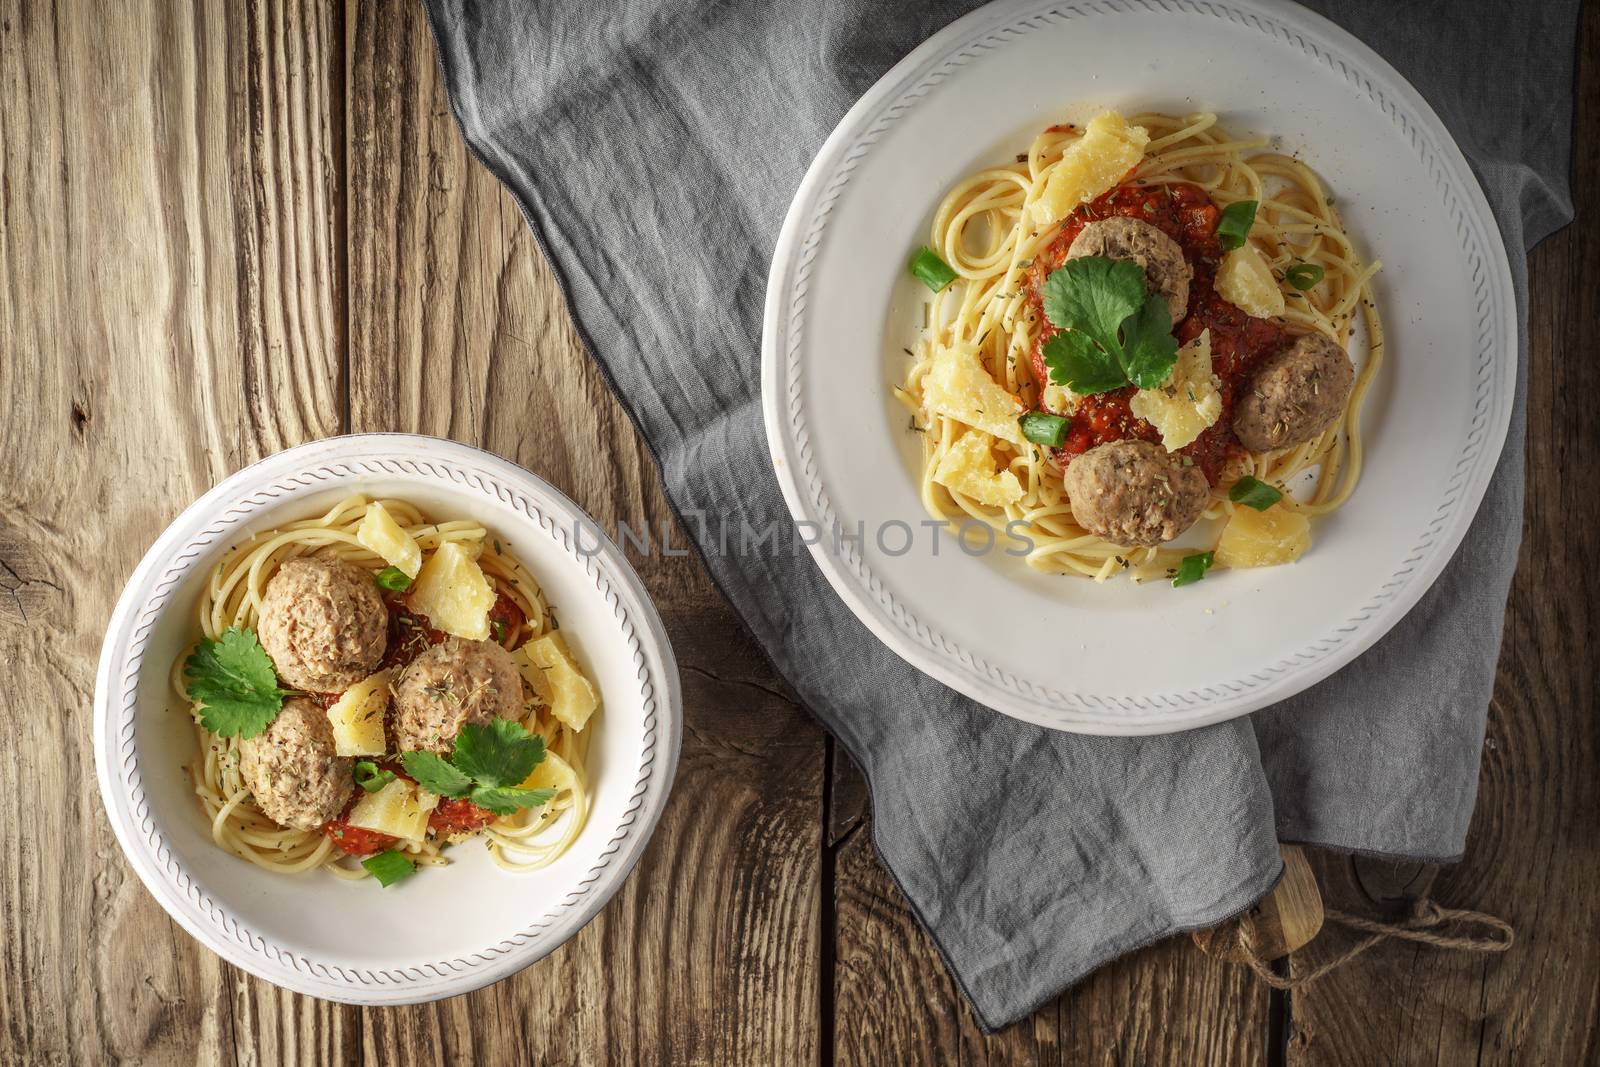 Ready-made spaghetti with meatballs at the old table by Deniskarpenkov